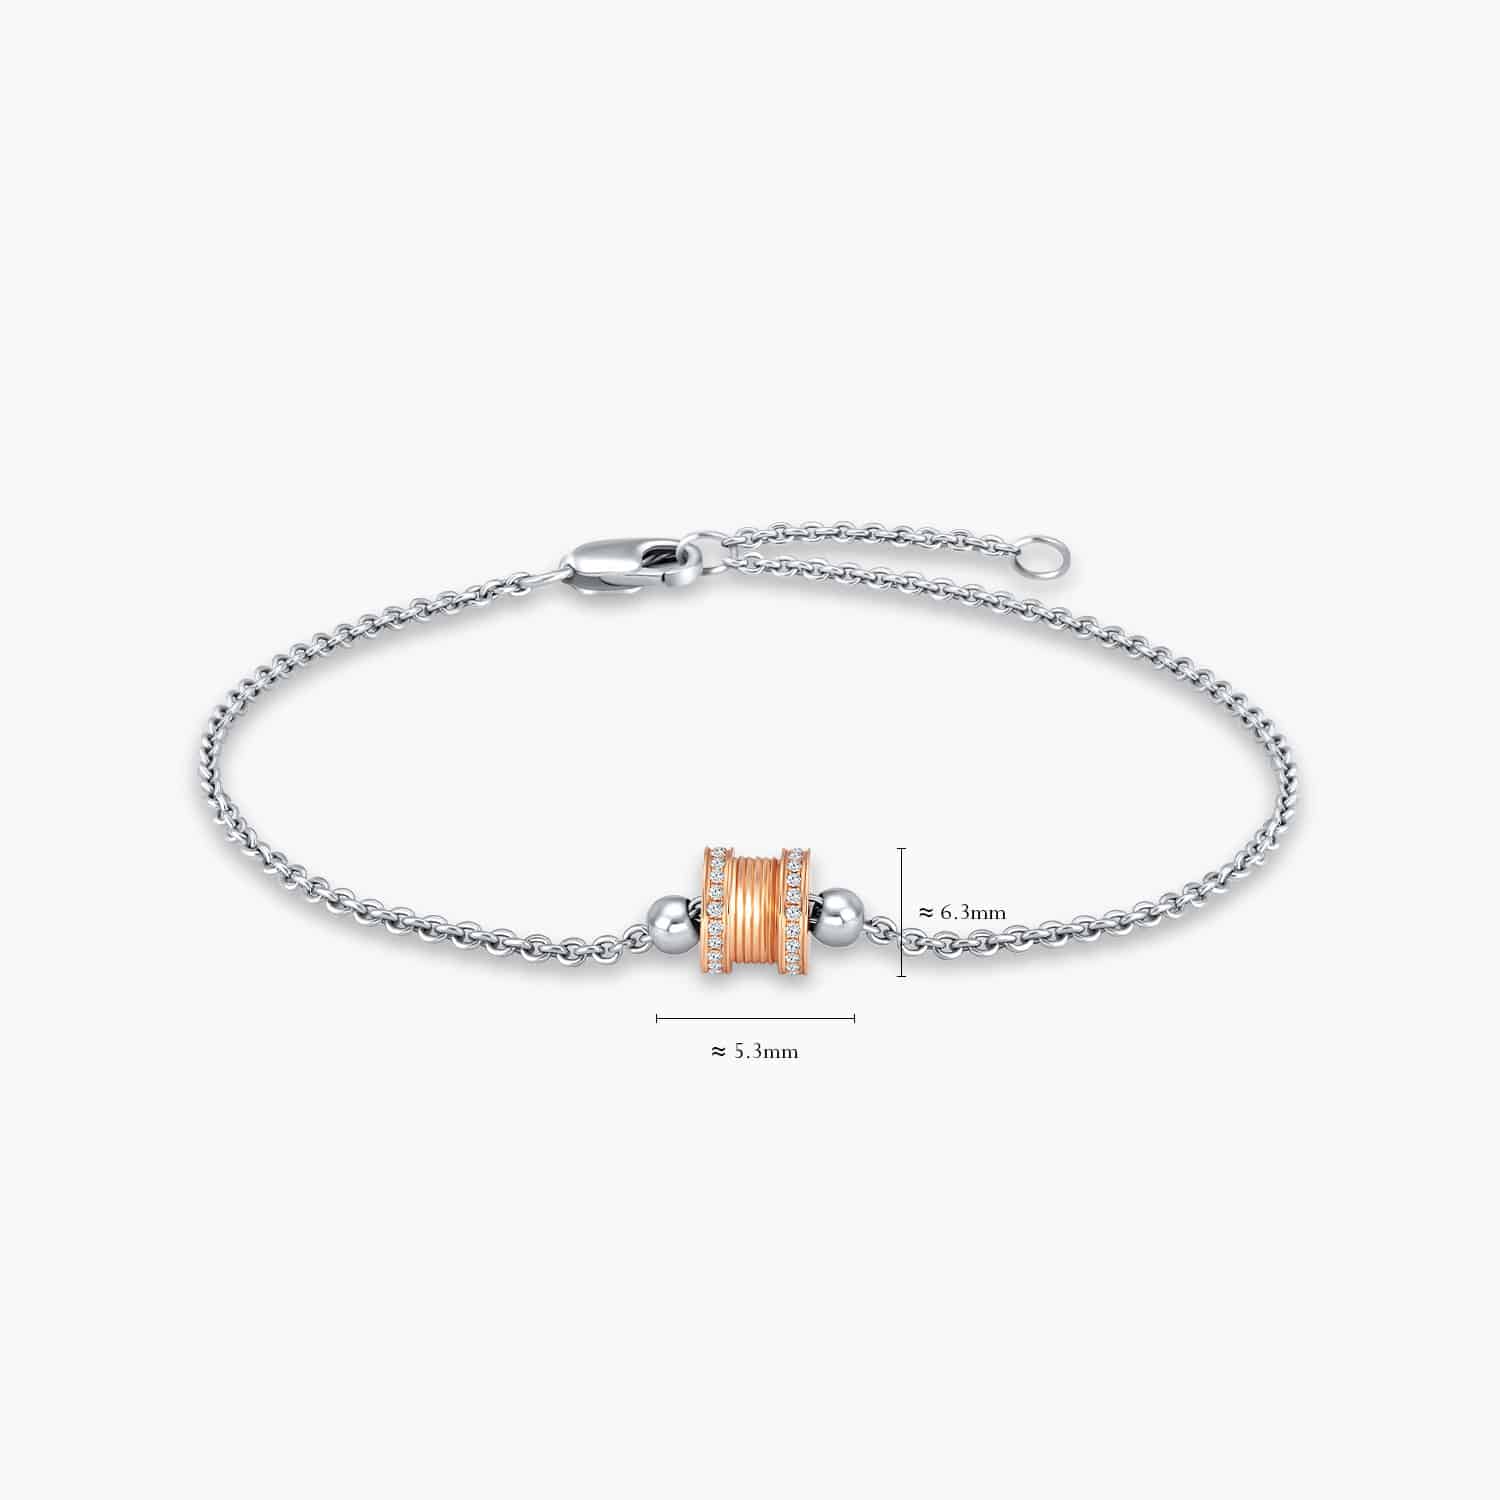 LvcPromise Diamond Bracelet with 46 diamonds in 18k White and Rose Gold